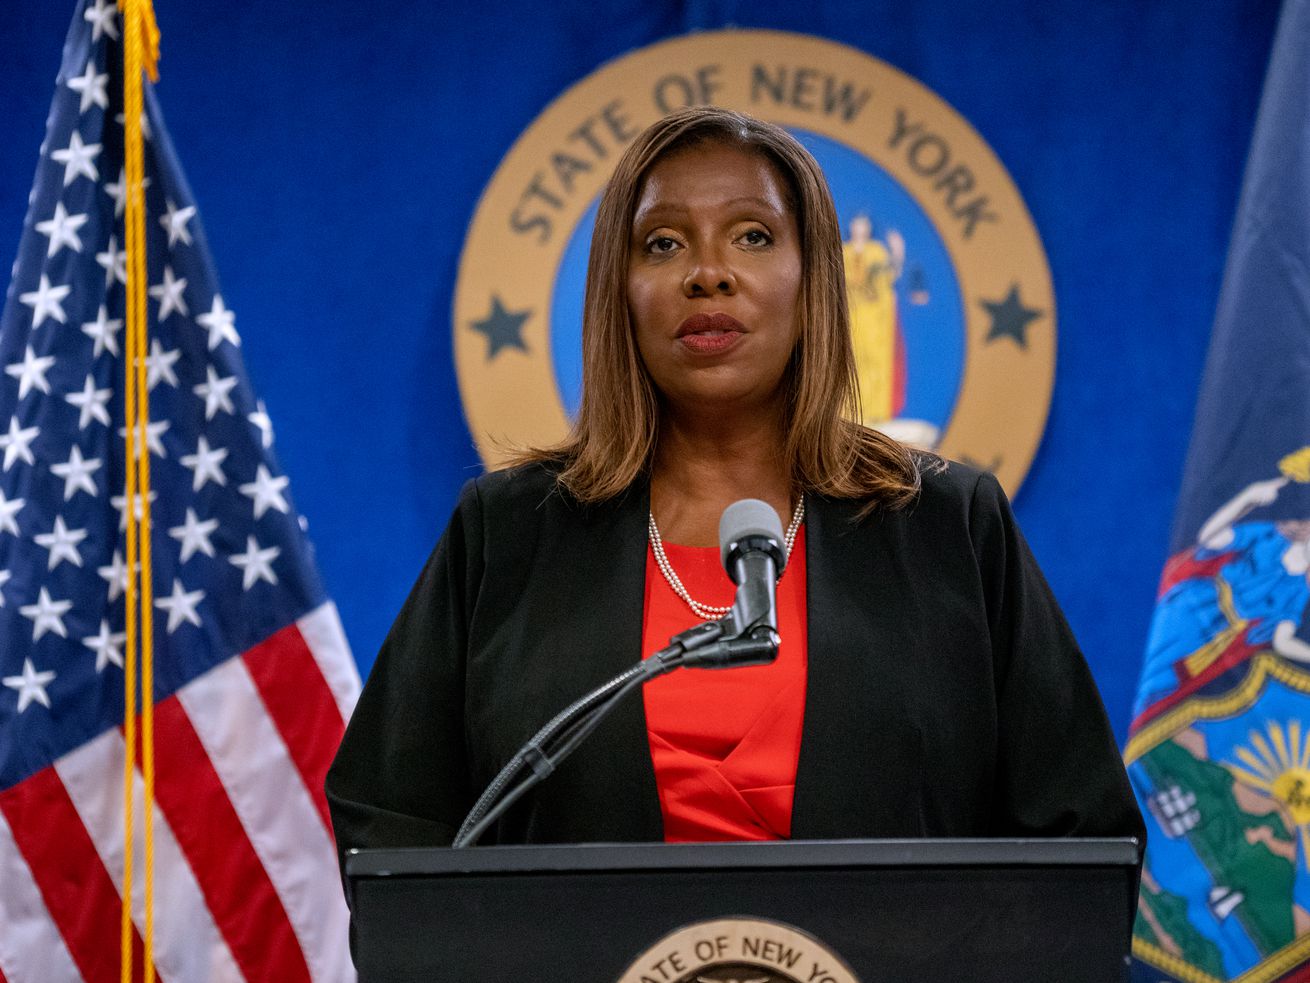 New York Attorney General Letitia James standing at a lectern and speaking into a microphone, with the seal of the state of New York behind her and flags on either side.